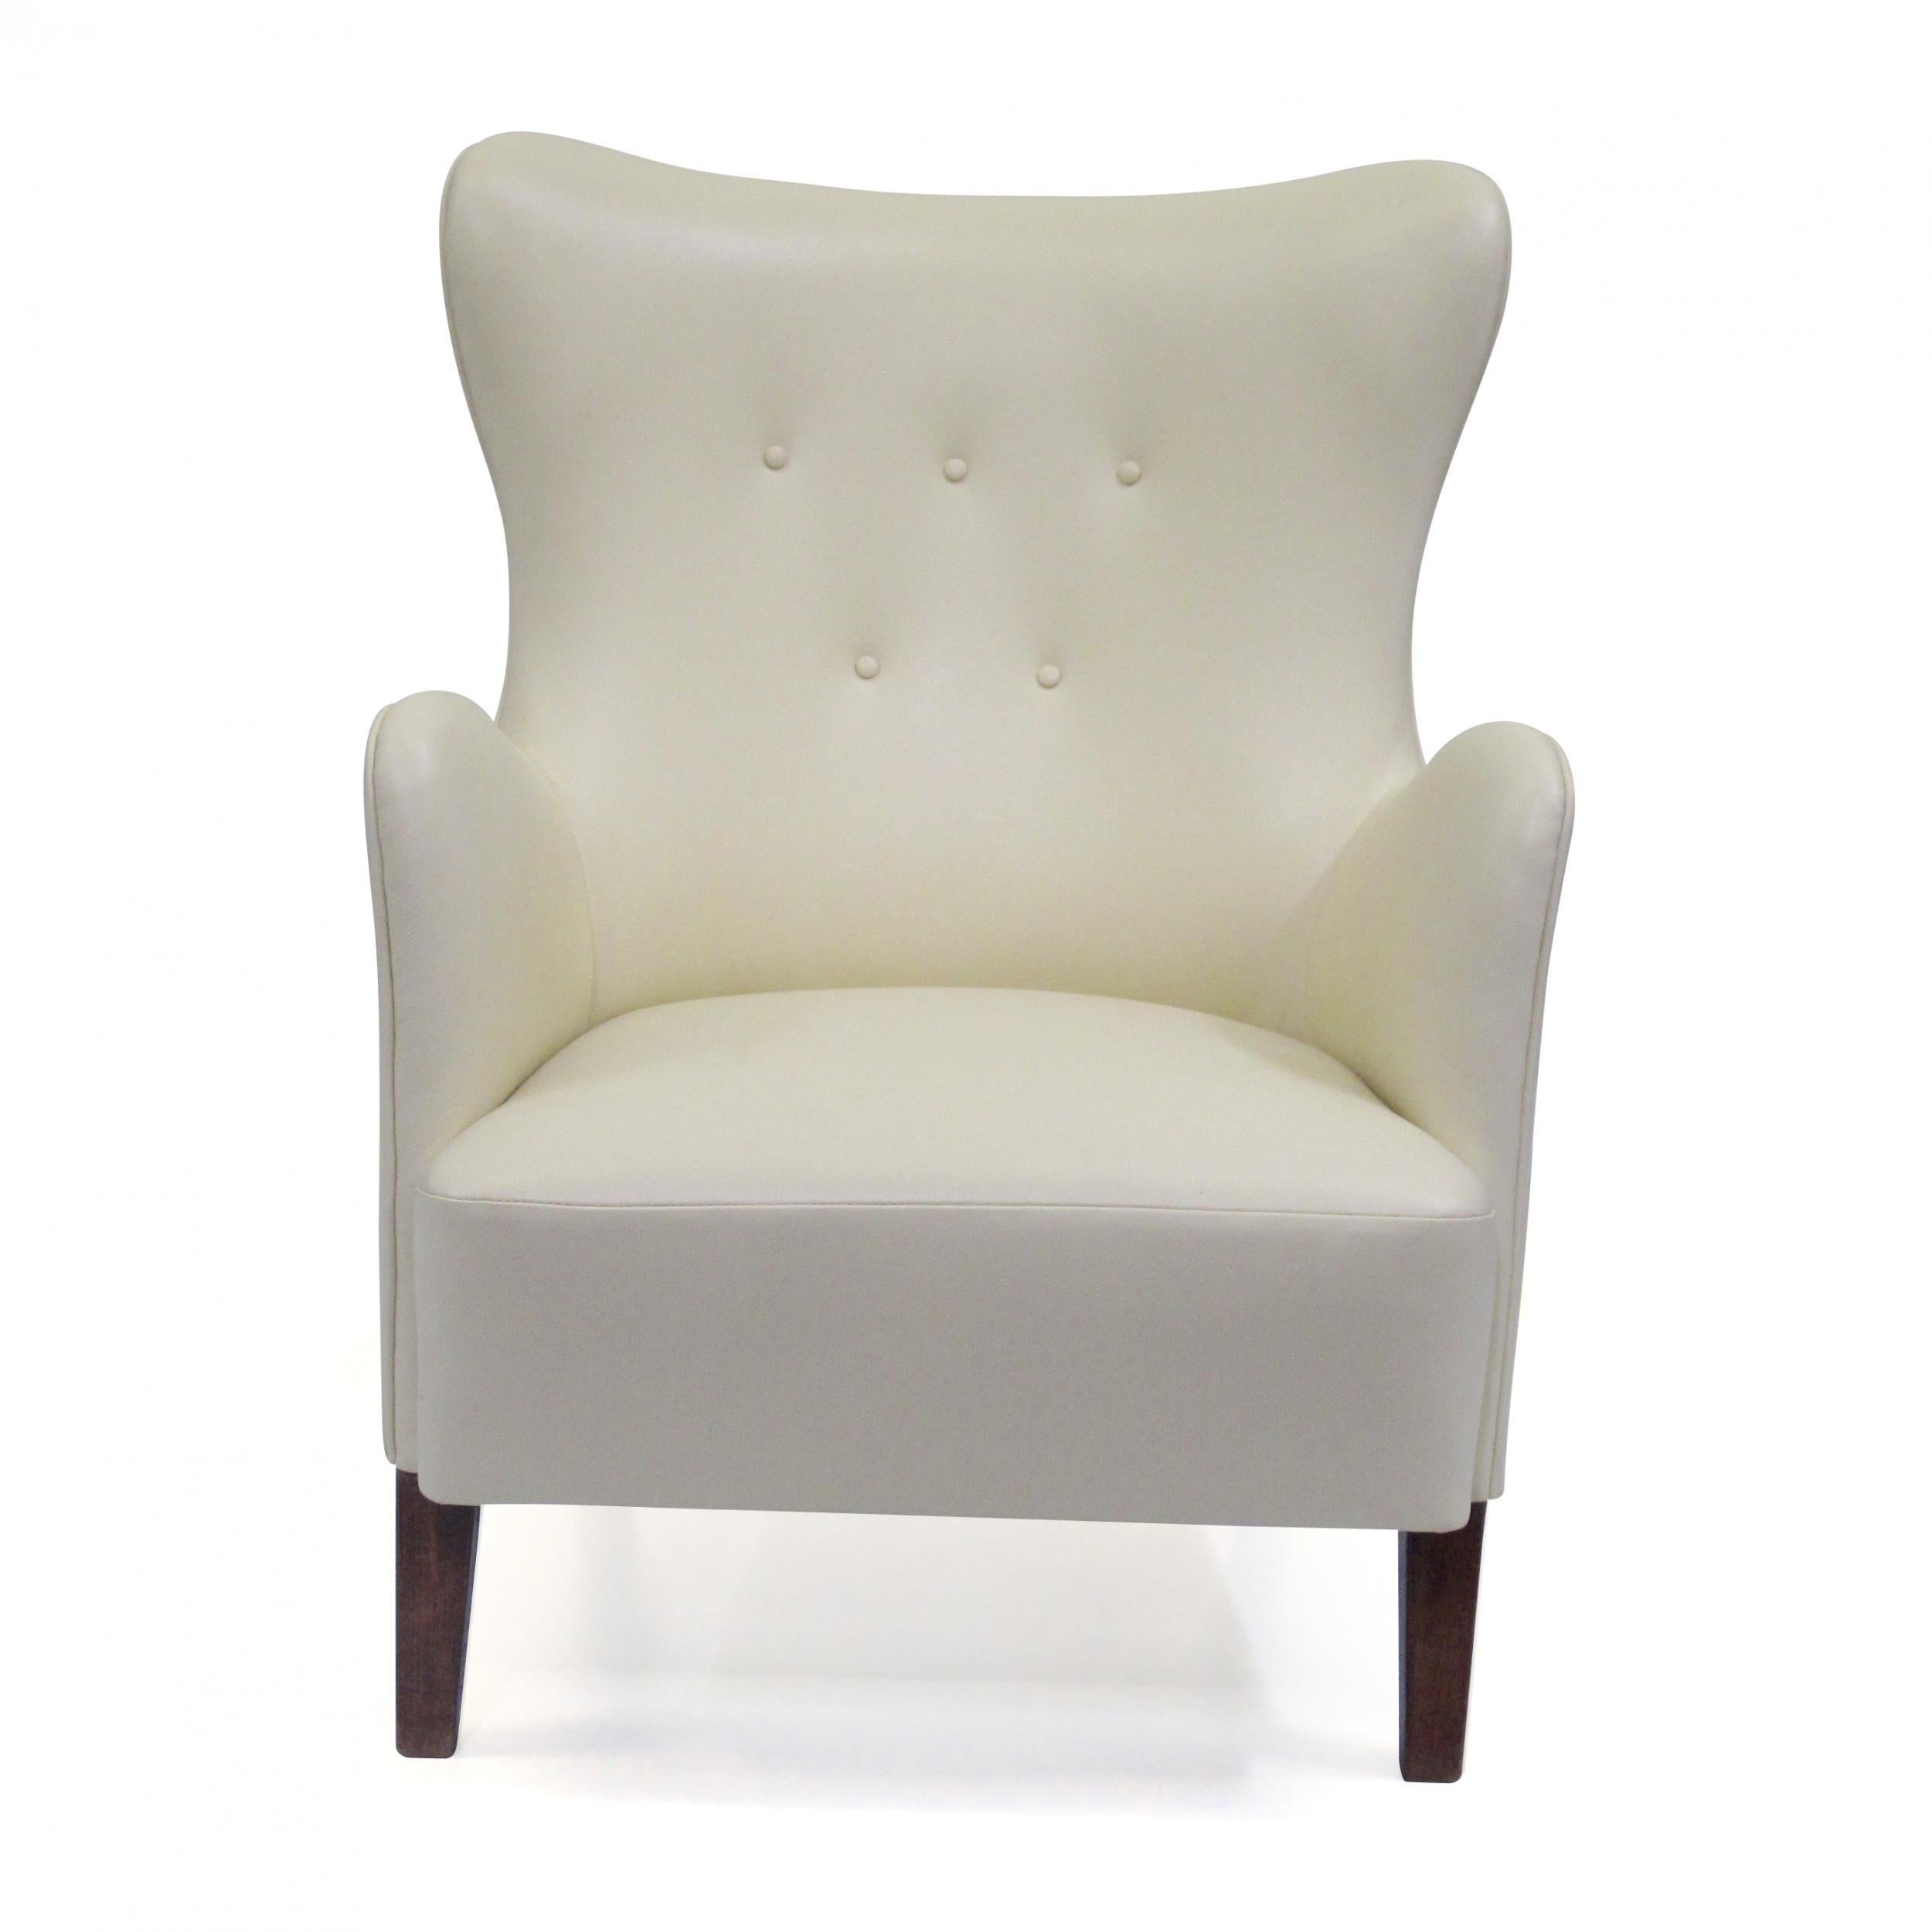 Midcentury Scandinavian lounge chair crafted of a solid wood frame, hand-tied springs, and horsehair padding. The curved button-tufted backrest offers excellent back support. Newly upholstered in a soft cream color leather. Raised on walnut stained